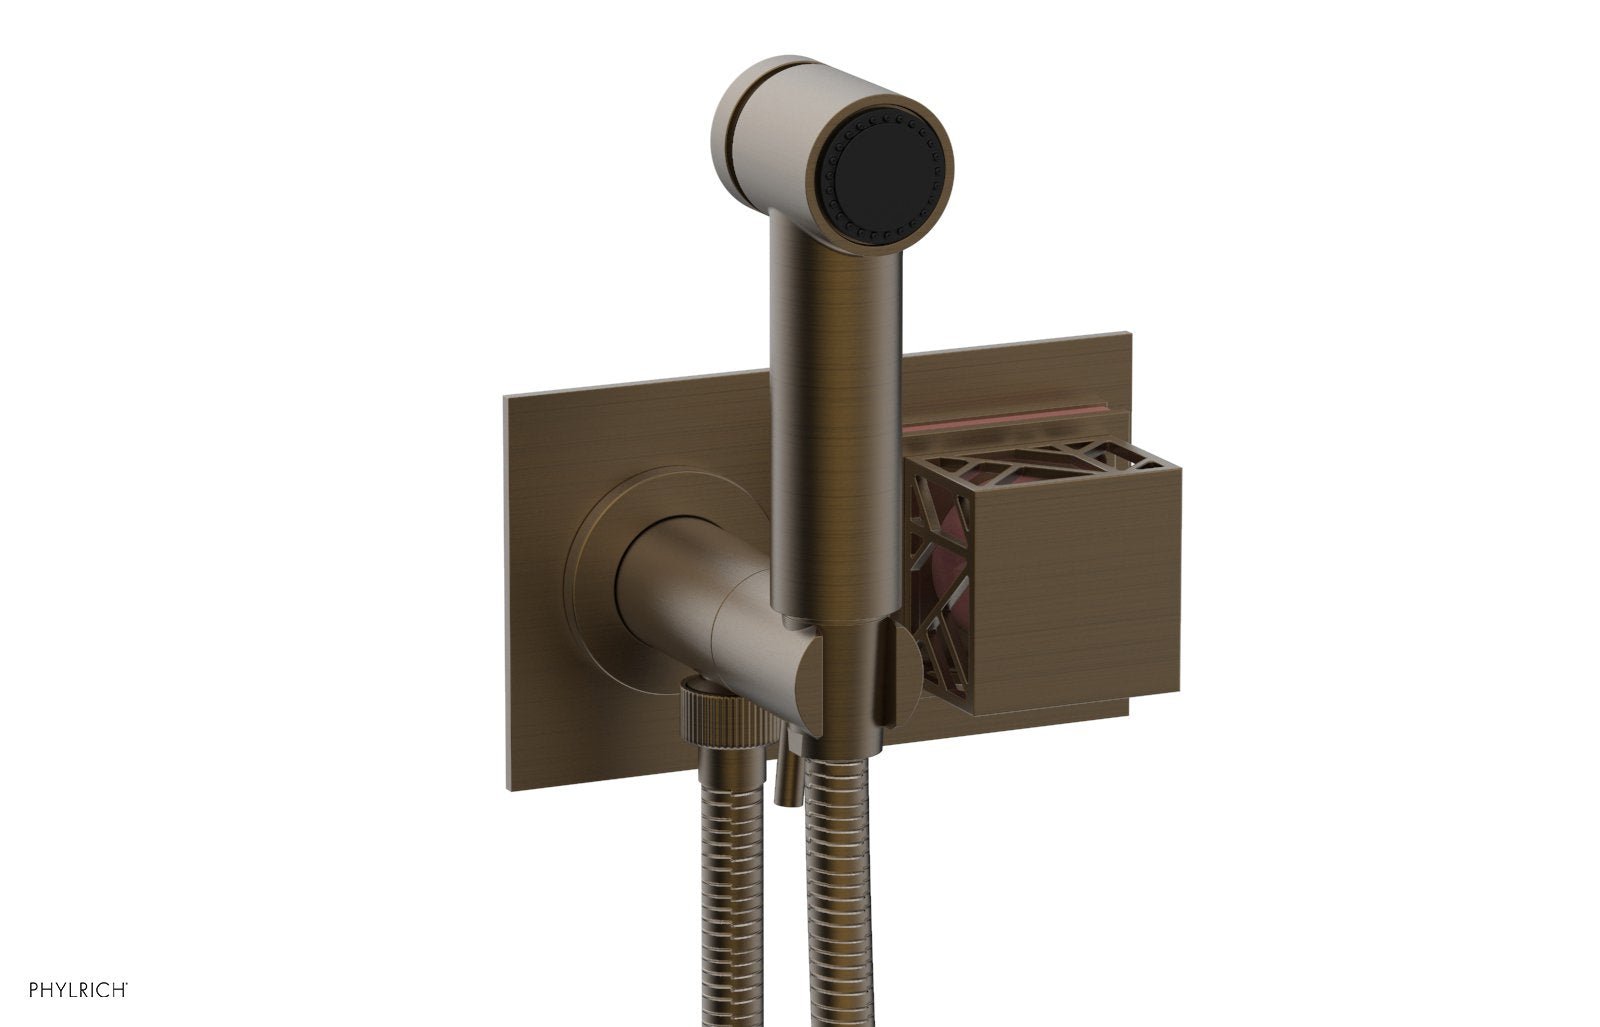 Phylrich JOLIE Wall Mounted Bidet, Square Handle with "Pink" Accents